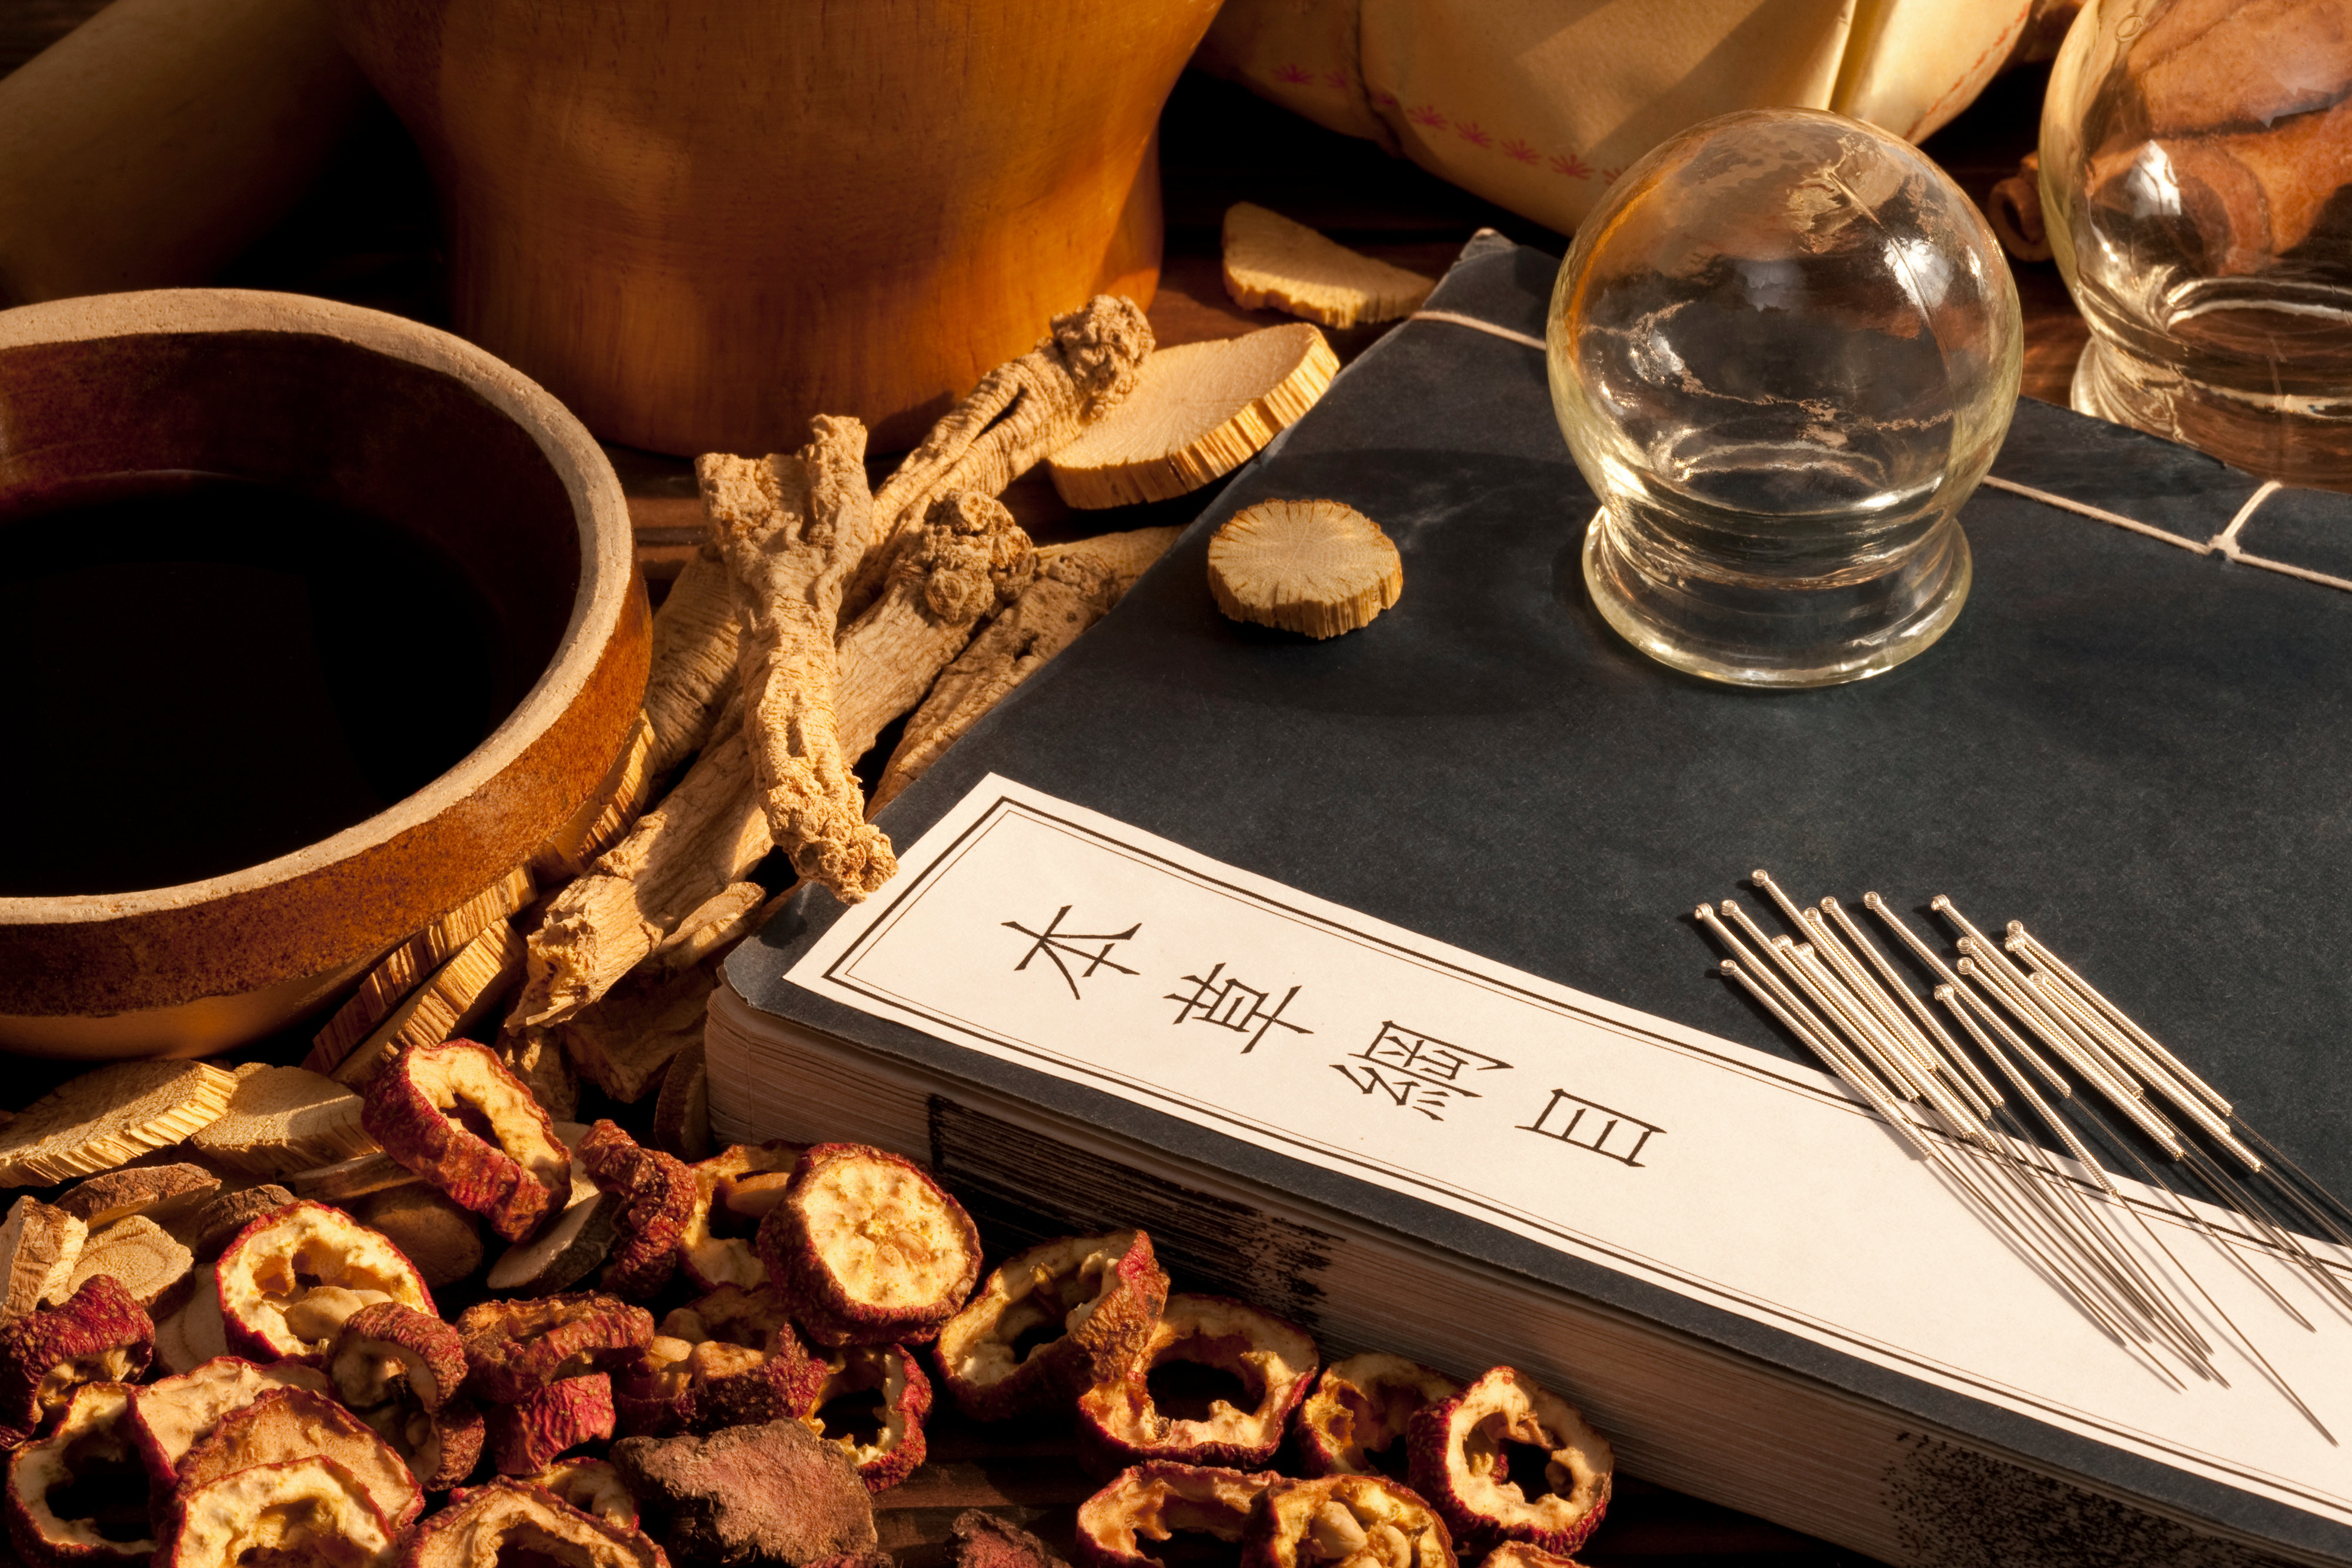 Traditional Chinese herbal medicine therapy with ancient Chinese medical book